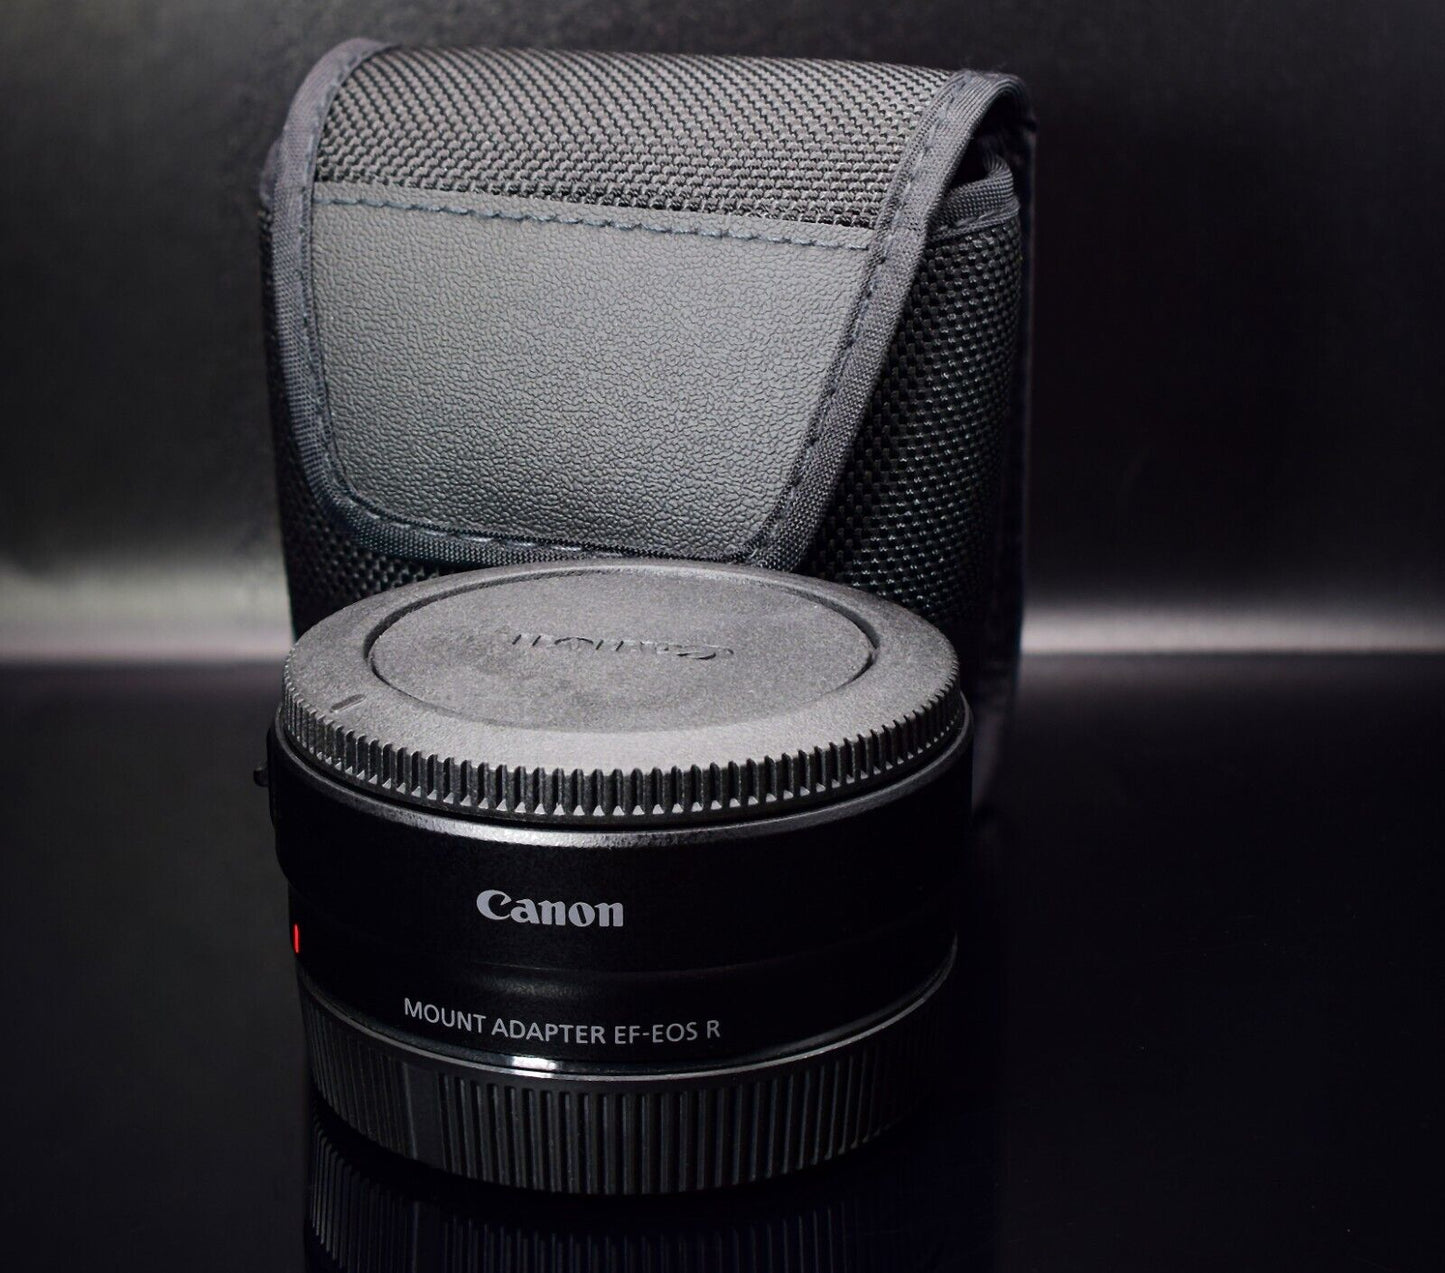 Canon EF-EOS R Mount Adapter / Adaptor with Case Protective Caps and Makers Box